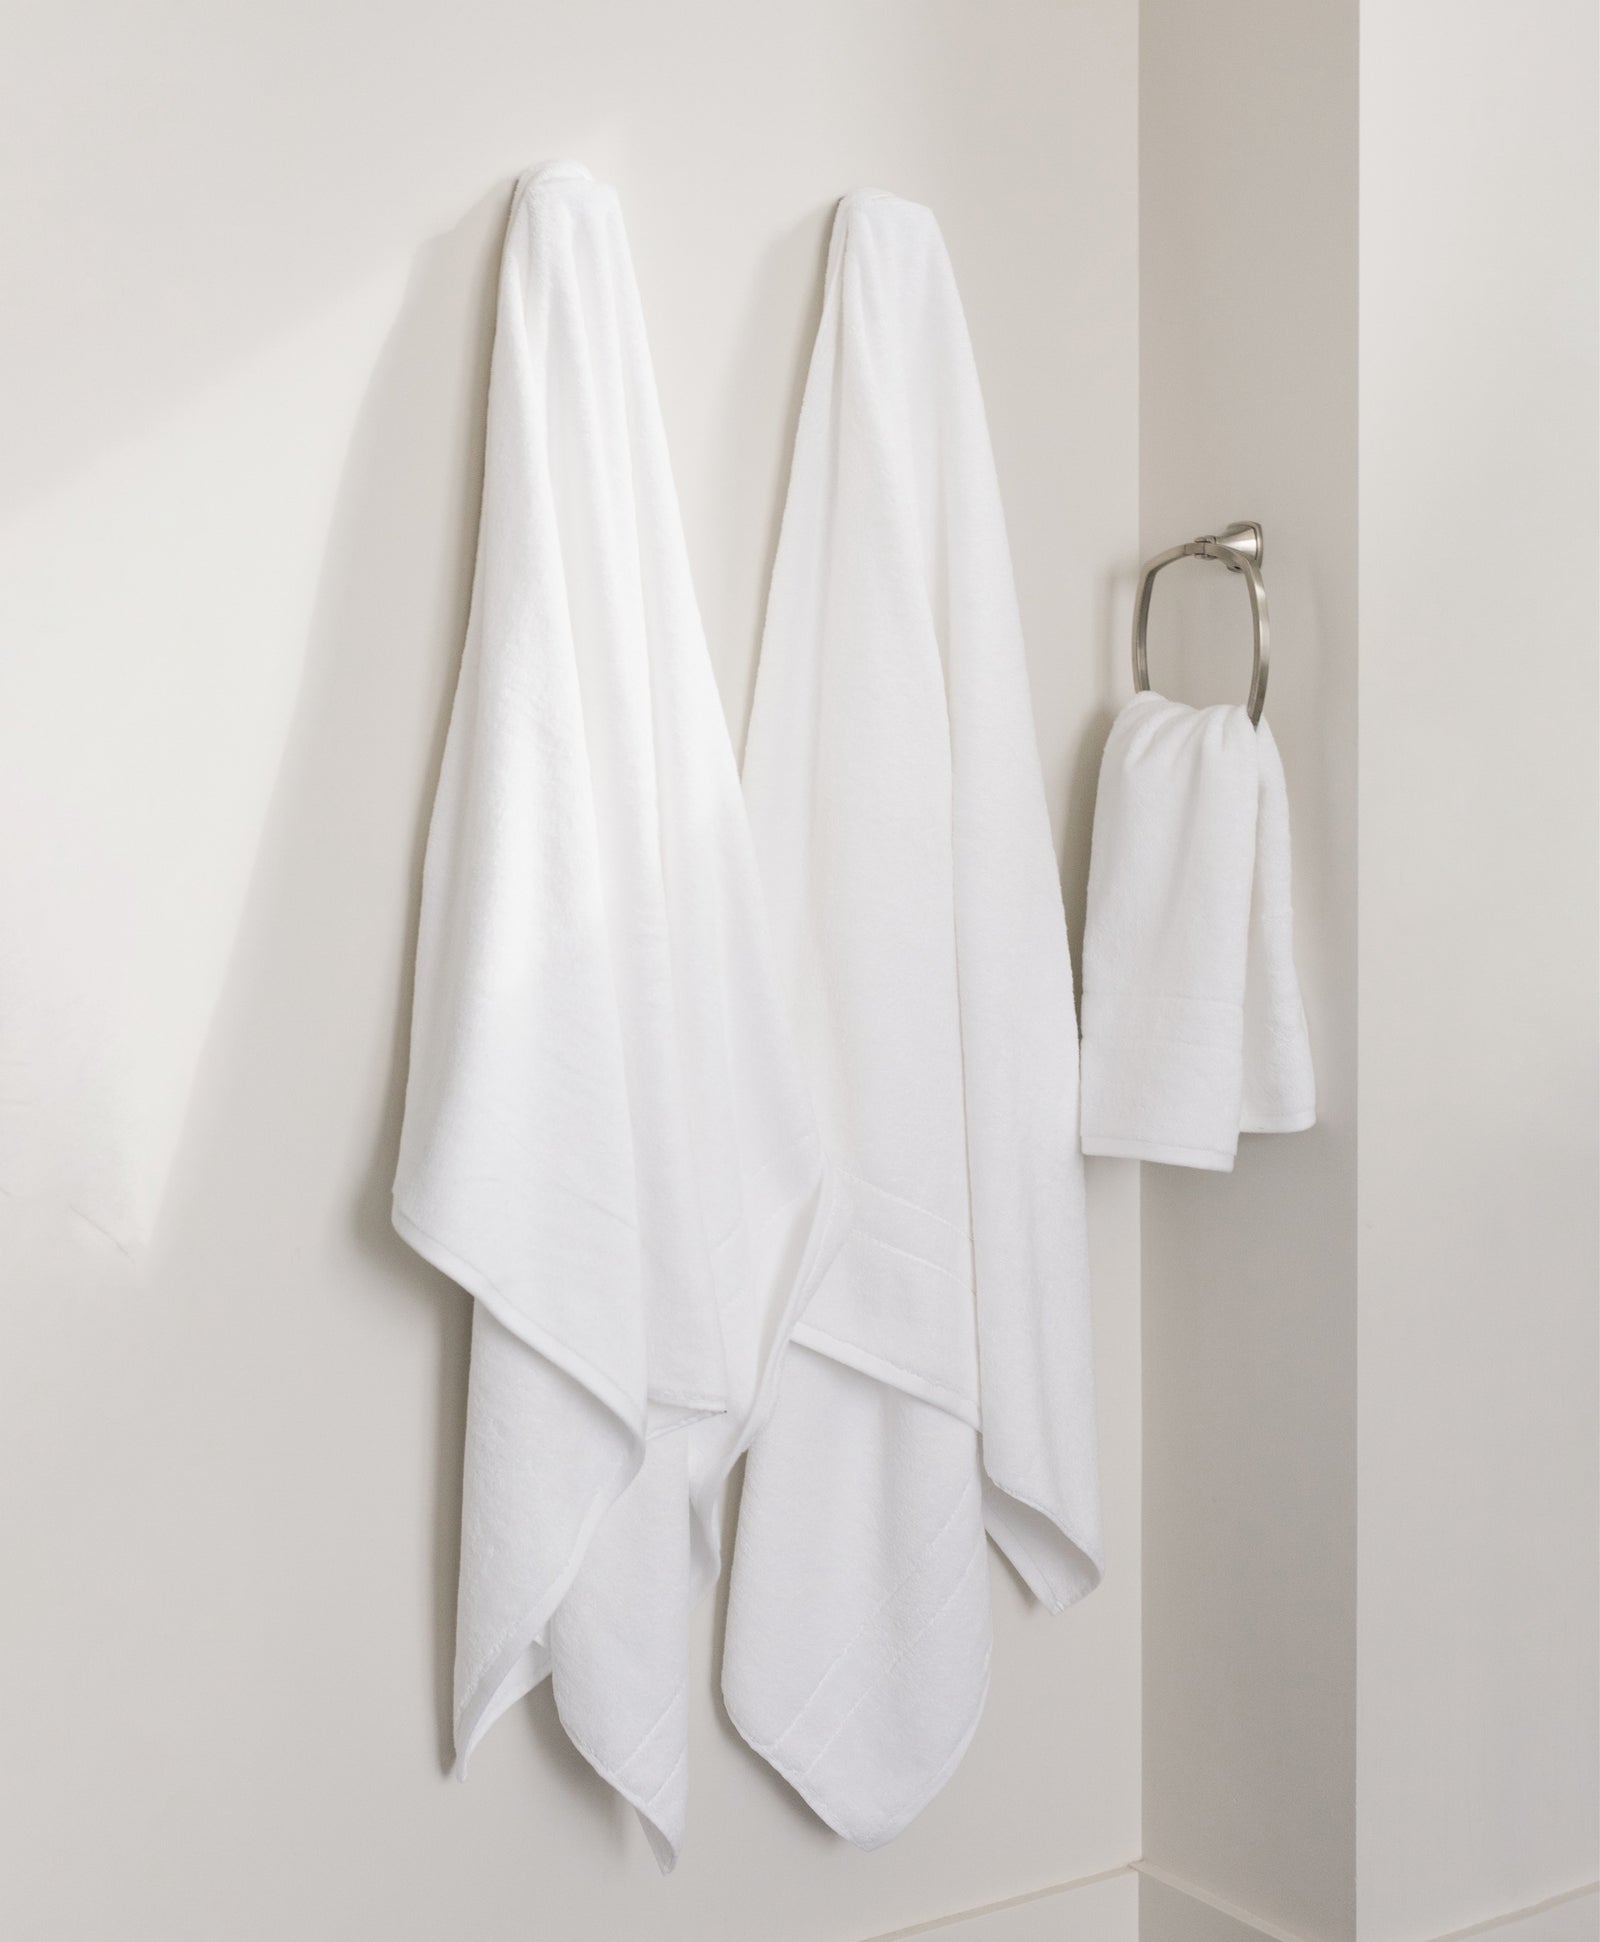 Premium Plush Bath Towels in the color white. Photo of Premium Plush Bath Towels taken in a bathroom showing the towels which are hung from a towel rack. 